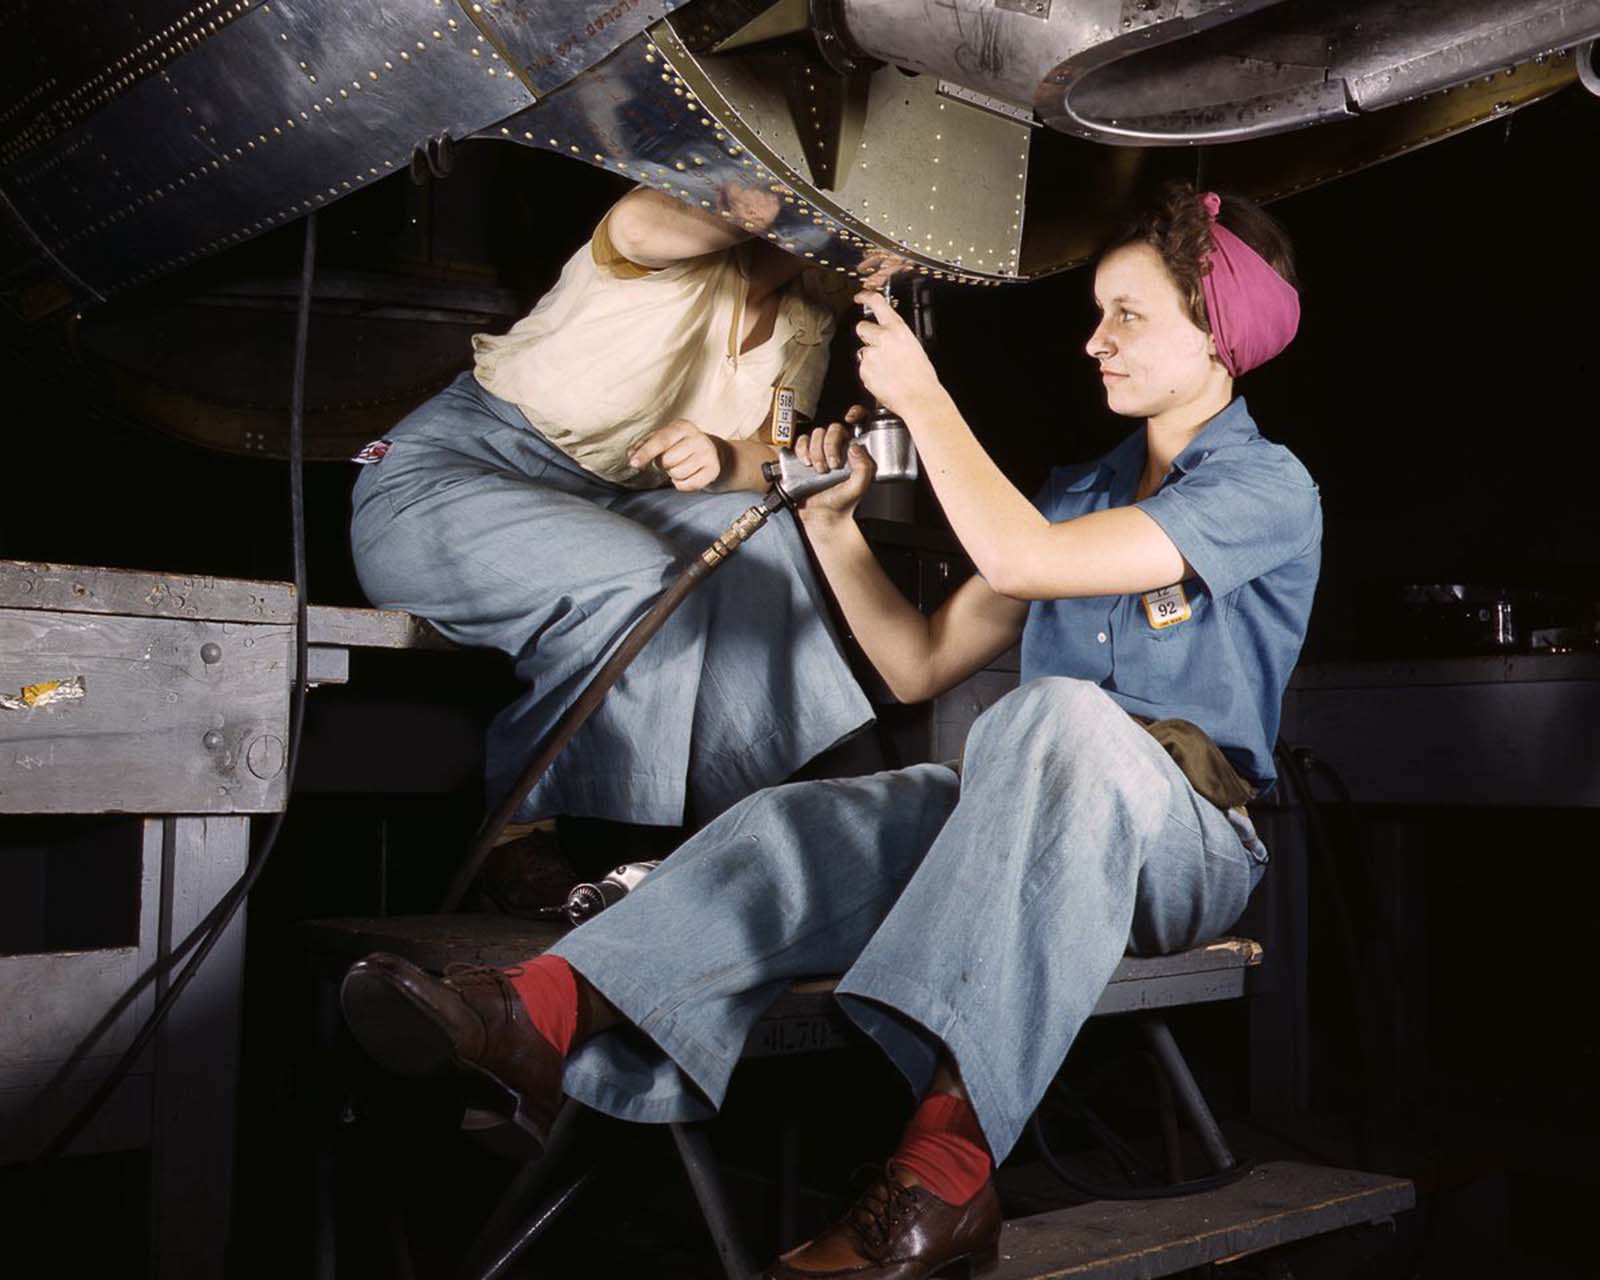 Douglas Aircraft Company employees work on the belly of a bomber at the plant in Long Beach, California, 1942.